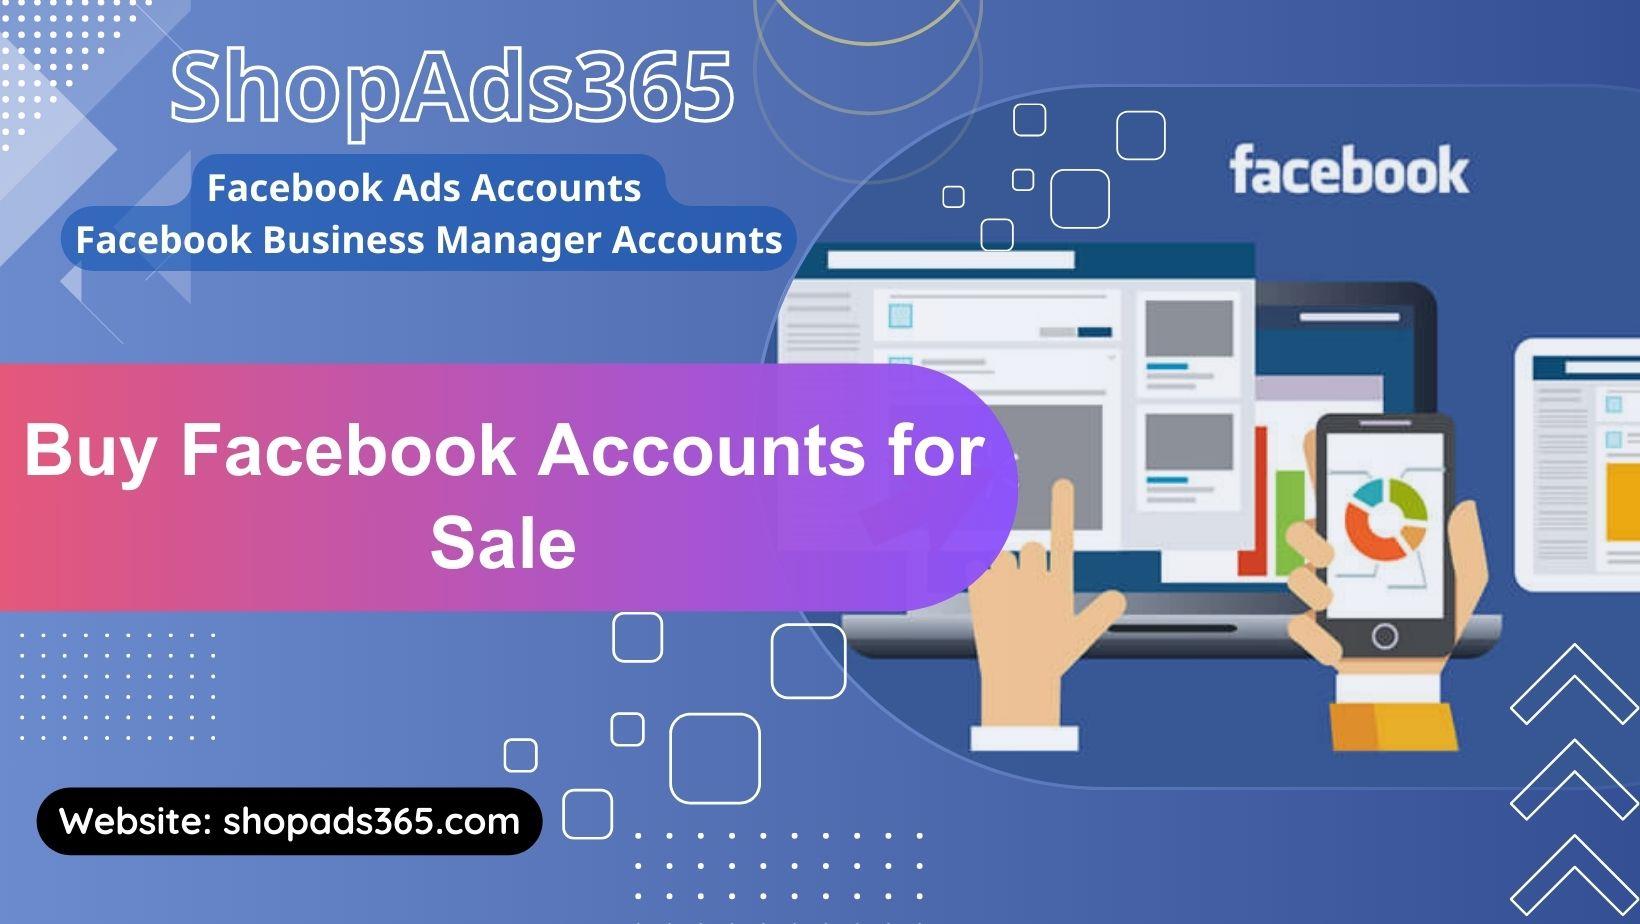 Buy Facebook Accounts for Sale Risks, Policies, and Best Practices